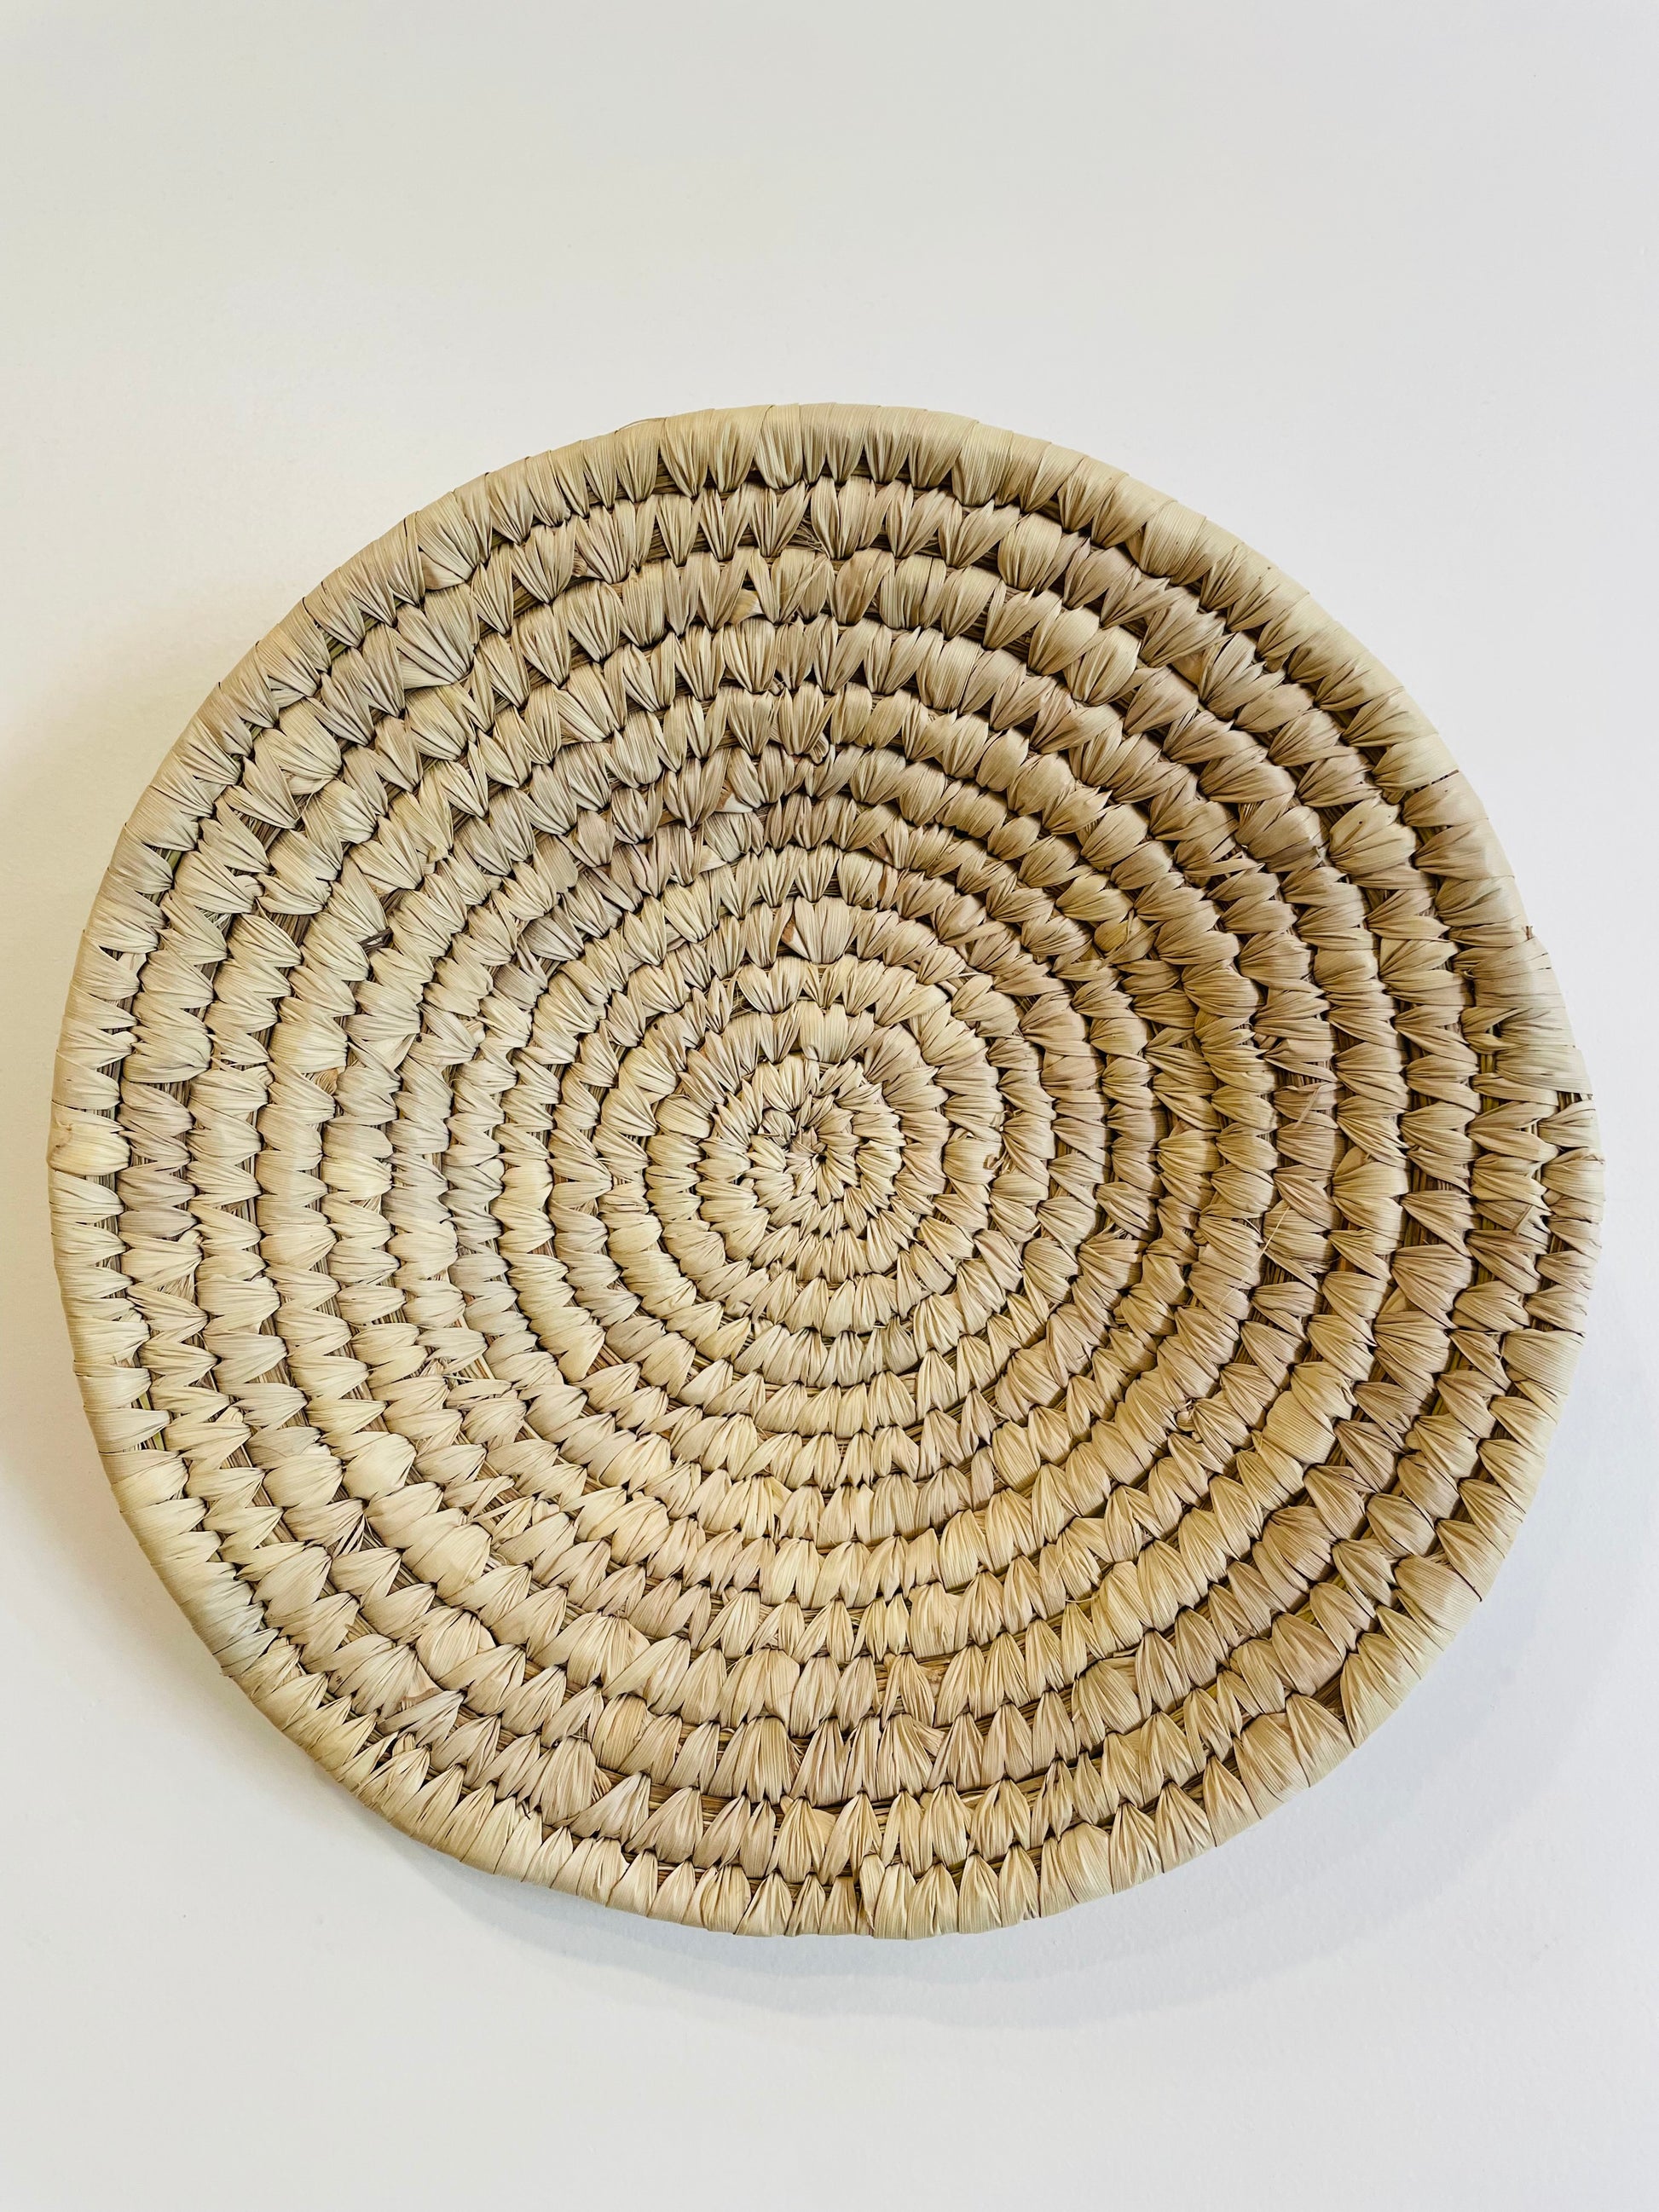  Artisanal Palm Leaf Design, Boho Home Accessory, Circular Wall Baskets, Easy Hanging Hook, Eco-friendly Plate, Fruit or Bread Baskets, Handcrafted Wall Décor, Indian Artisan Craft, Natural Palm Leaf Plates, Palm Leaf Woven Plates, Spiral-shaped Design, Sustainable Home Décor, Three Sizes Available, Wall Hanging Plate, Tesu